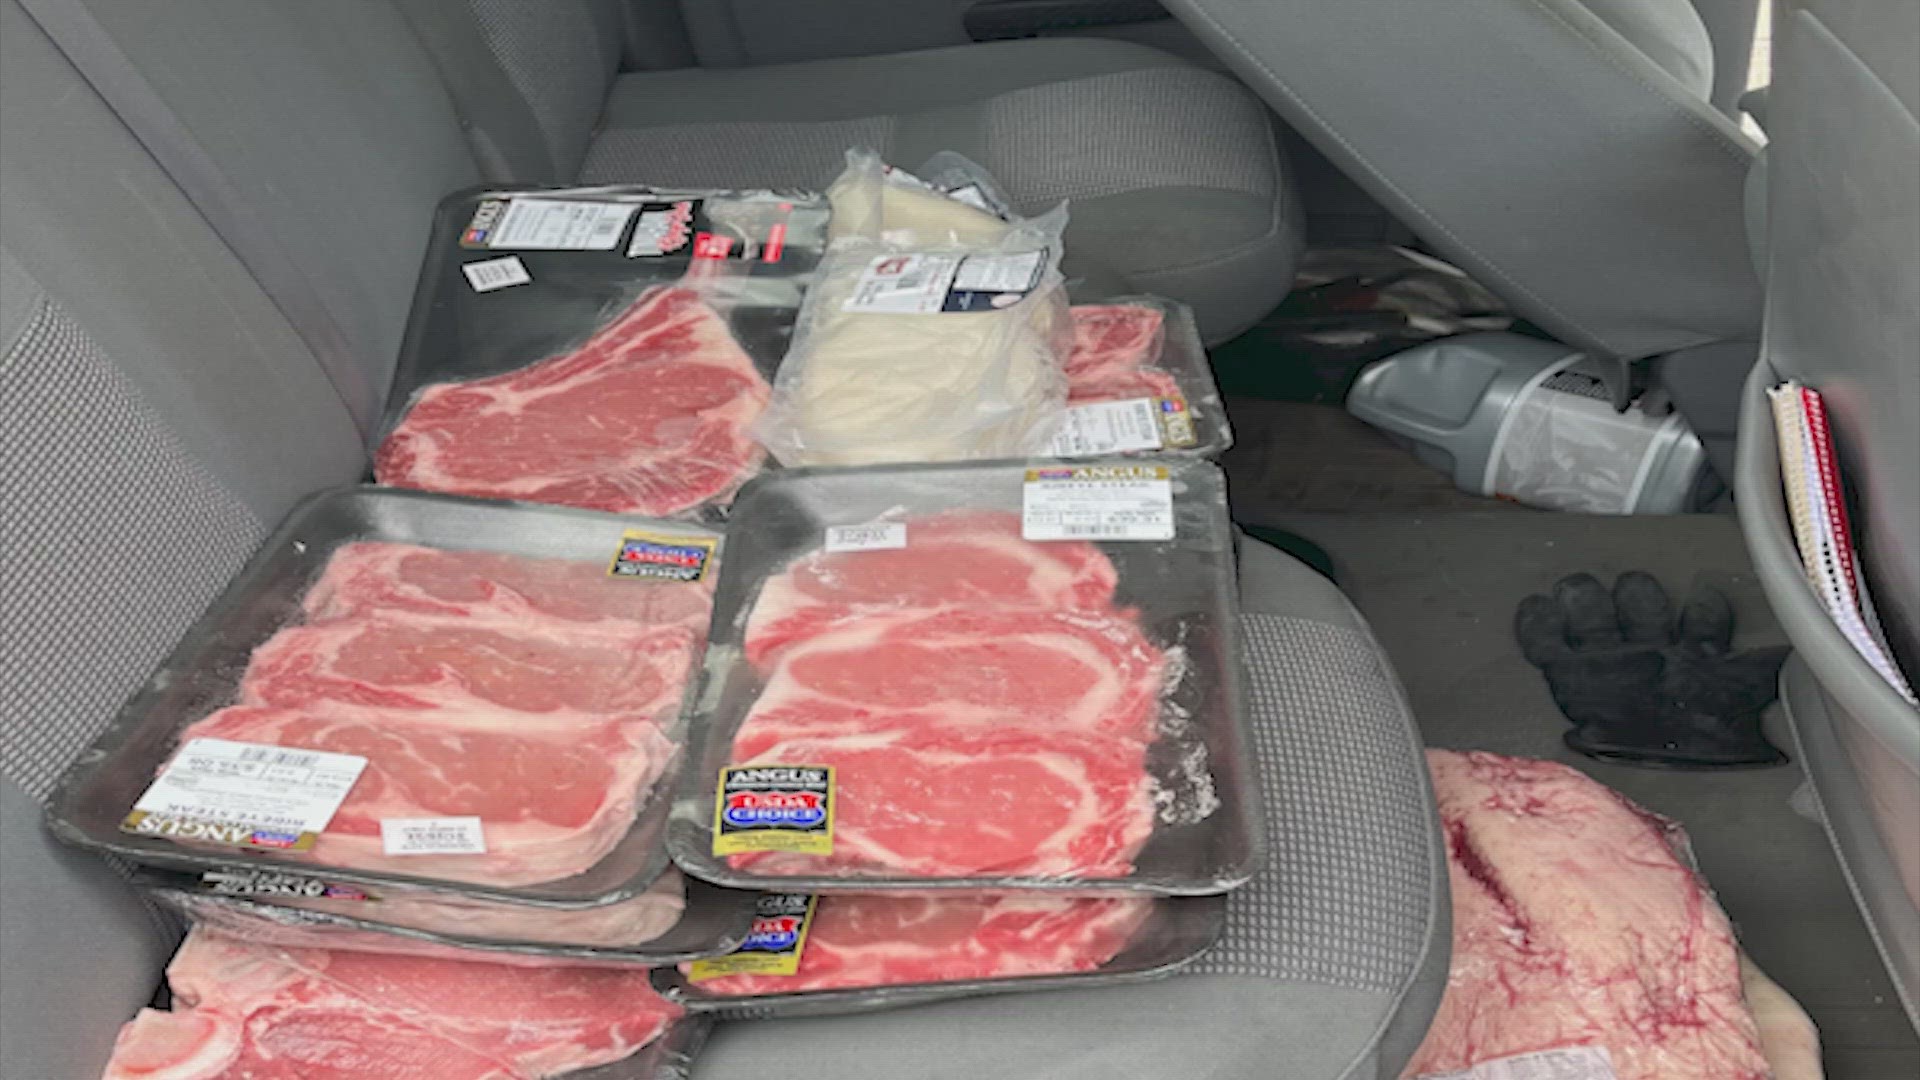 Two people are facing charges after 18 packages of stolen meat were found inside a car during a traffic stop on Tuesday, according to Rosenberg police.